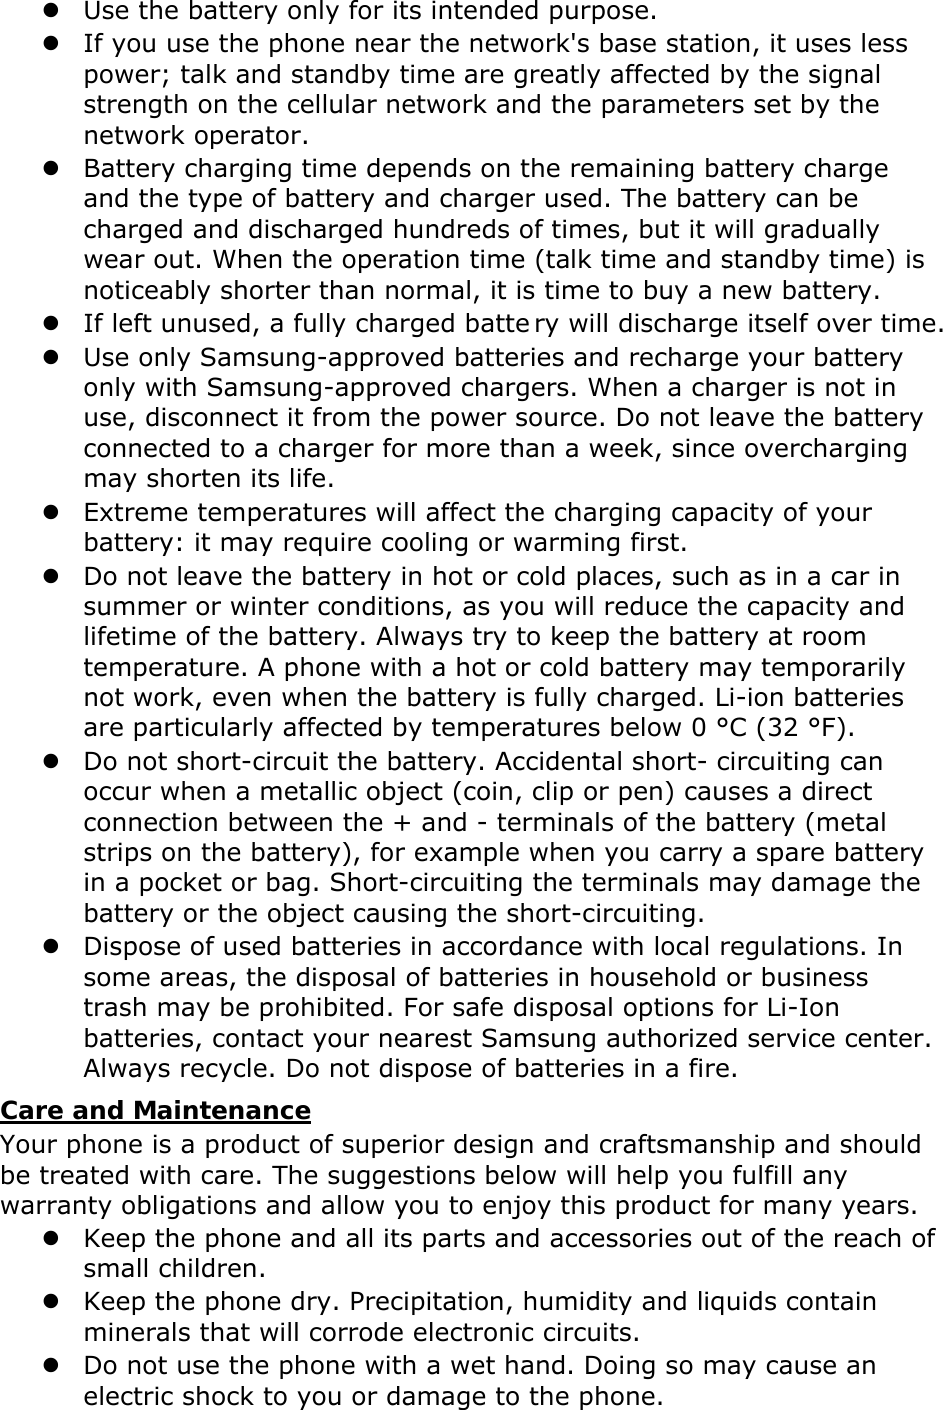 z Use the battery only for its intended purpose. z If you use the phone near the network&apos;s base station, it uses less power; talk and standby time are greatly affected by the signal strength on the cellular network and the parameters set by the network operator. z Battery charging time depends on the remaining battery charge and the type of battery and charger used. The battery can be charged and discharged hundreds of times, but it will gradually wear out. When the operation time (talk time and standby time) is noticeably shorter than normal, it is time to buy a new battery. z If left unused, a fully charged batte ry will discharge itself over time.  z Use only Samsung-approved batteries and recharge your battery only with Samsung-approved chargers. When a charger is not in use, disconnect it from the power source. Do not leave the battery connected to a charger for more than a week, since overcharging may shorten its life. z Extreme temperatures will affect the charging capacity of your battery: it may require cooling or warming first. z Do not leave the battery in hot or cold places, such as in a car in summer or winter conditions, as you will reduce the capacity and lifetime of the battery. Always try to keep the battery at room temperature. A phone with a hot or cold battery may temporarily not work, even when the battery is fully charged. Li-ion batteries are particularly affected by temperatures below 0 °C (32 °F). z Do not short-circuit the battery. Accidental short- circuiting can occur when a metallic object (coin, clip or pen) causes a direct connection between the + and - terminals of the battery (metal strips on the battery), for example when you carry a spare battery in a pocket or bag. Short-circuiting the terminals may damage the battery or the object causing the short-circuiting. z Dispose of used batteries in accordance with local regulations. In some areas, the disposal of batteries in household or business trash may be prohibited. For safe disposal options for Li-Ion batteries, contact your nearest Samsung authorized service center. Always recycle. Do not dispose of batteries in a fire. Care and Maintenance Your phone is a product of superior design and craftsmanship and should be treated with care. The suggestions below will help you fulfill any warranty obligations and allow you to enjoy this product for many years. z Keep the phone and all its parts and accessories out of the reach of small children. z Keep the phone dry. Precipitation, humidity and liquids contain minerals that will corrode electronic circuits. z Do not use the phone with a wet hand. Doing so may cause an electric shock to you or damage to the phone. 